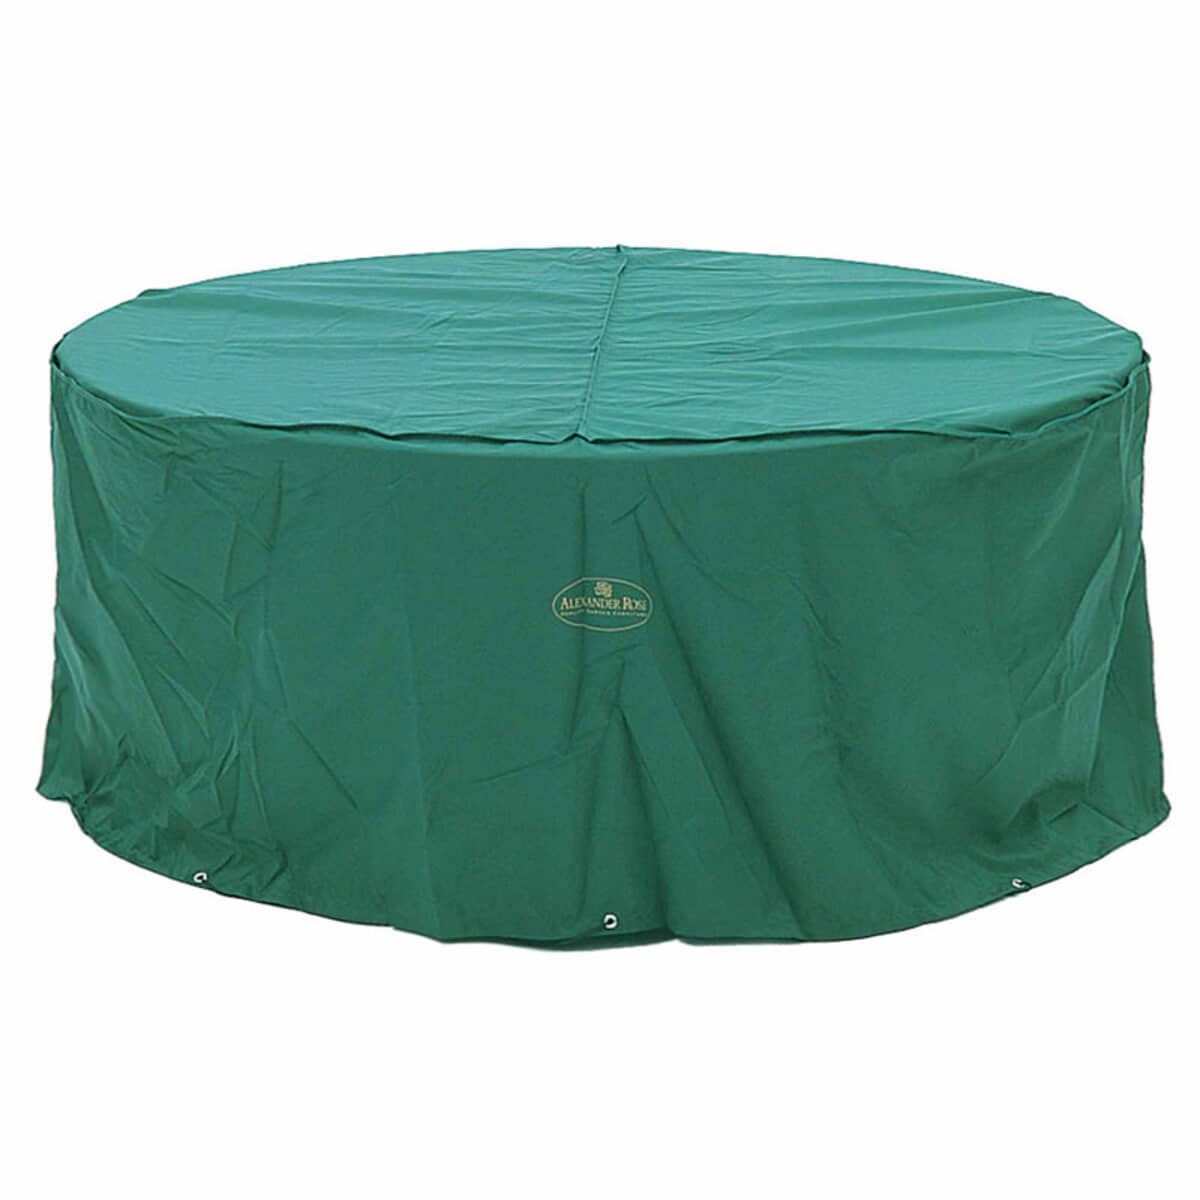 Alexander Rose Oval Table 1.6 x 1m Cover